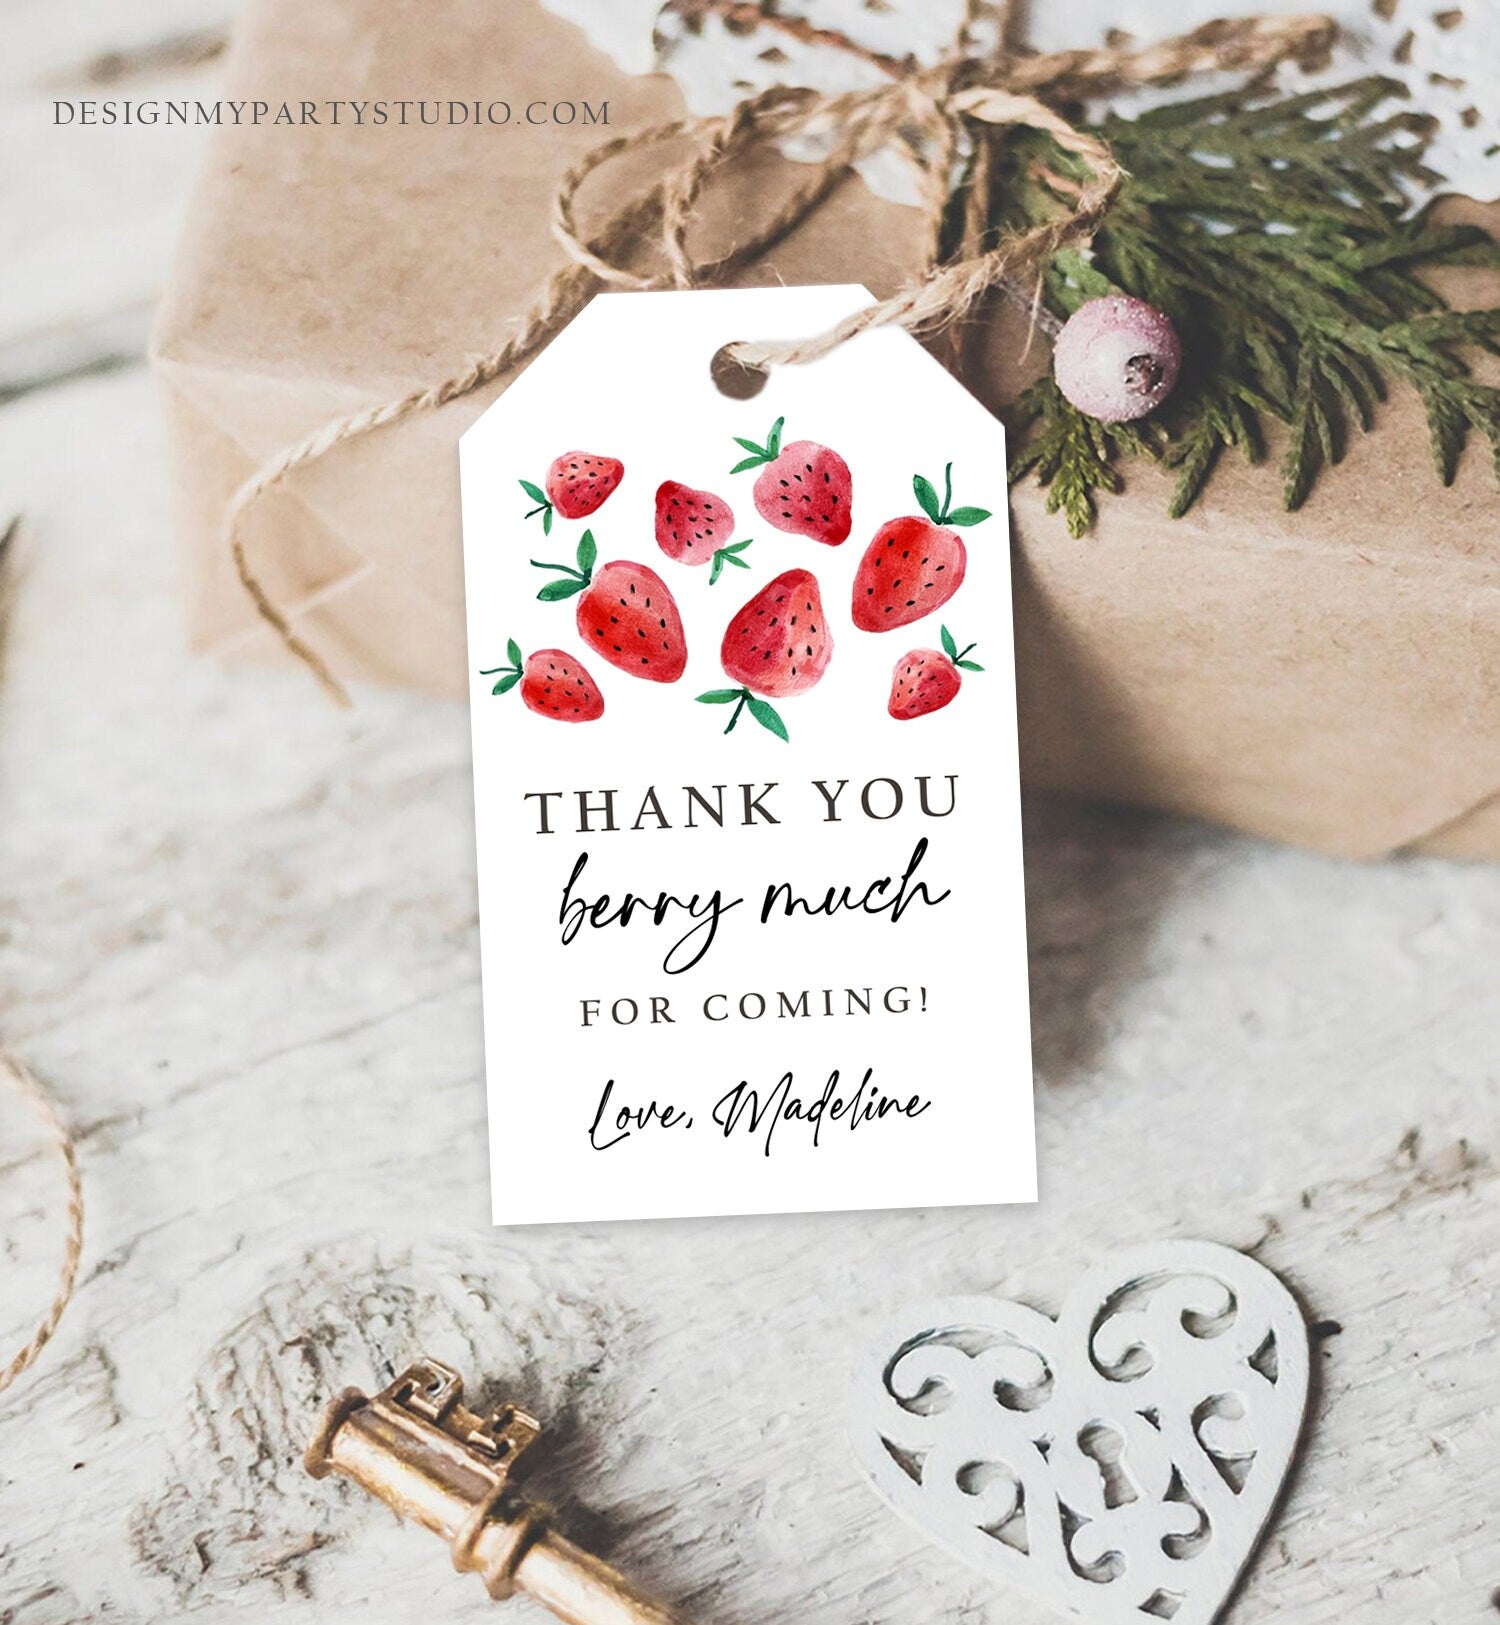 Editable Strawberry Favor Tags Strawberry Birthday Thank you tags Label Berry Much Gift tags Berry First Sweet Template PRINTABLE Corjl 0399